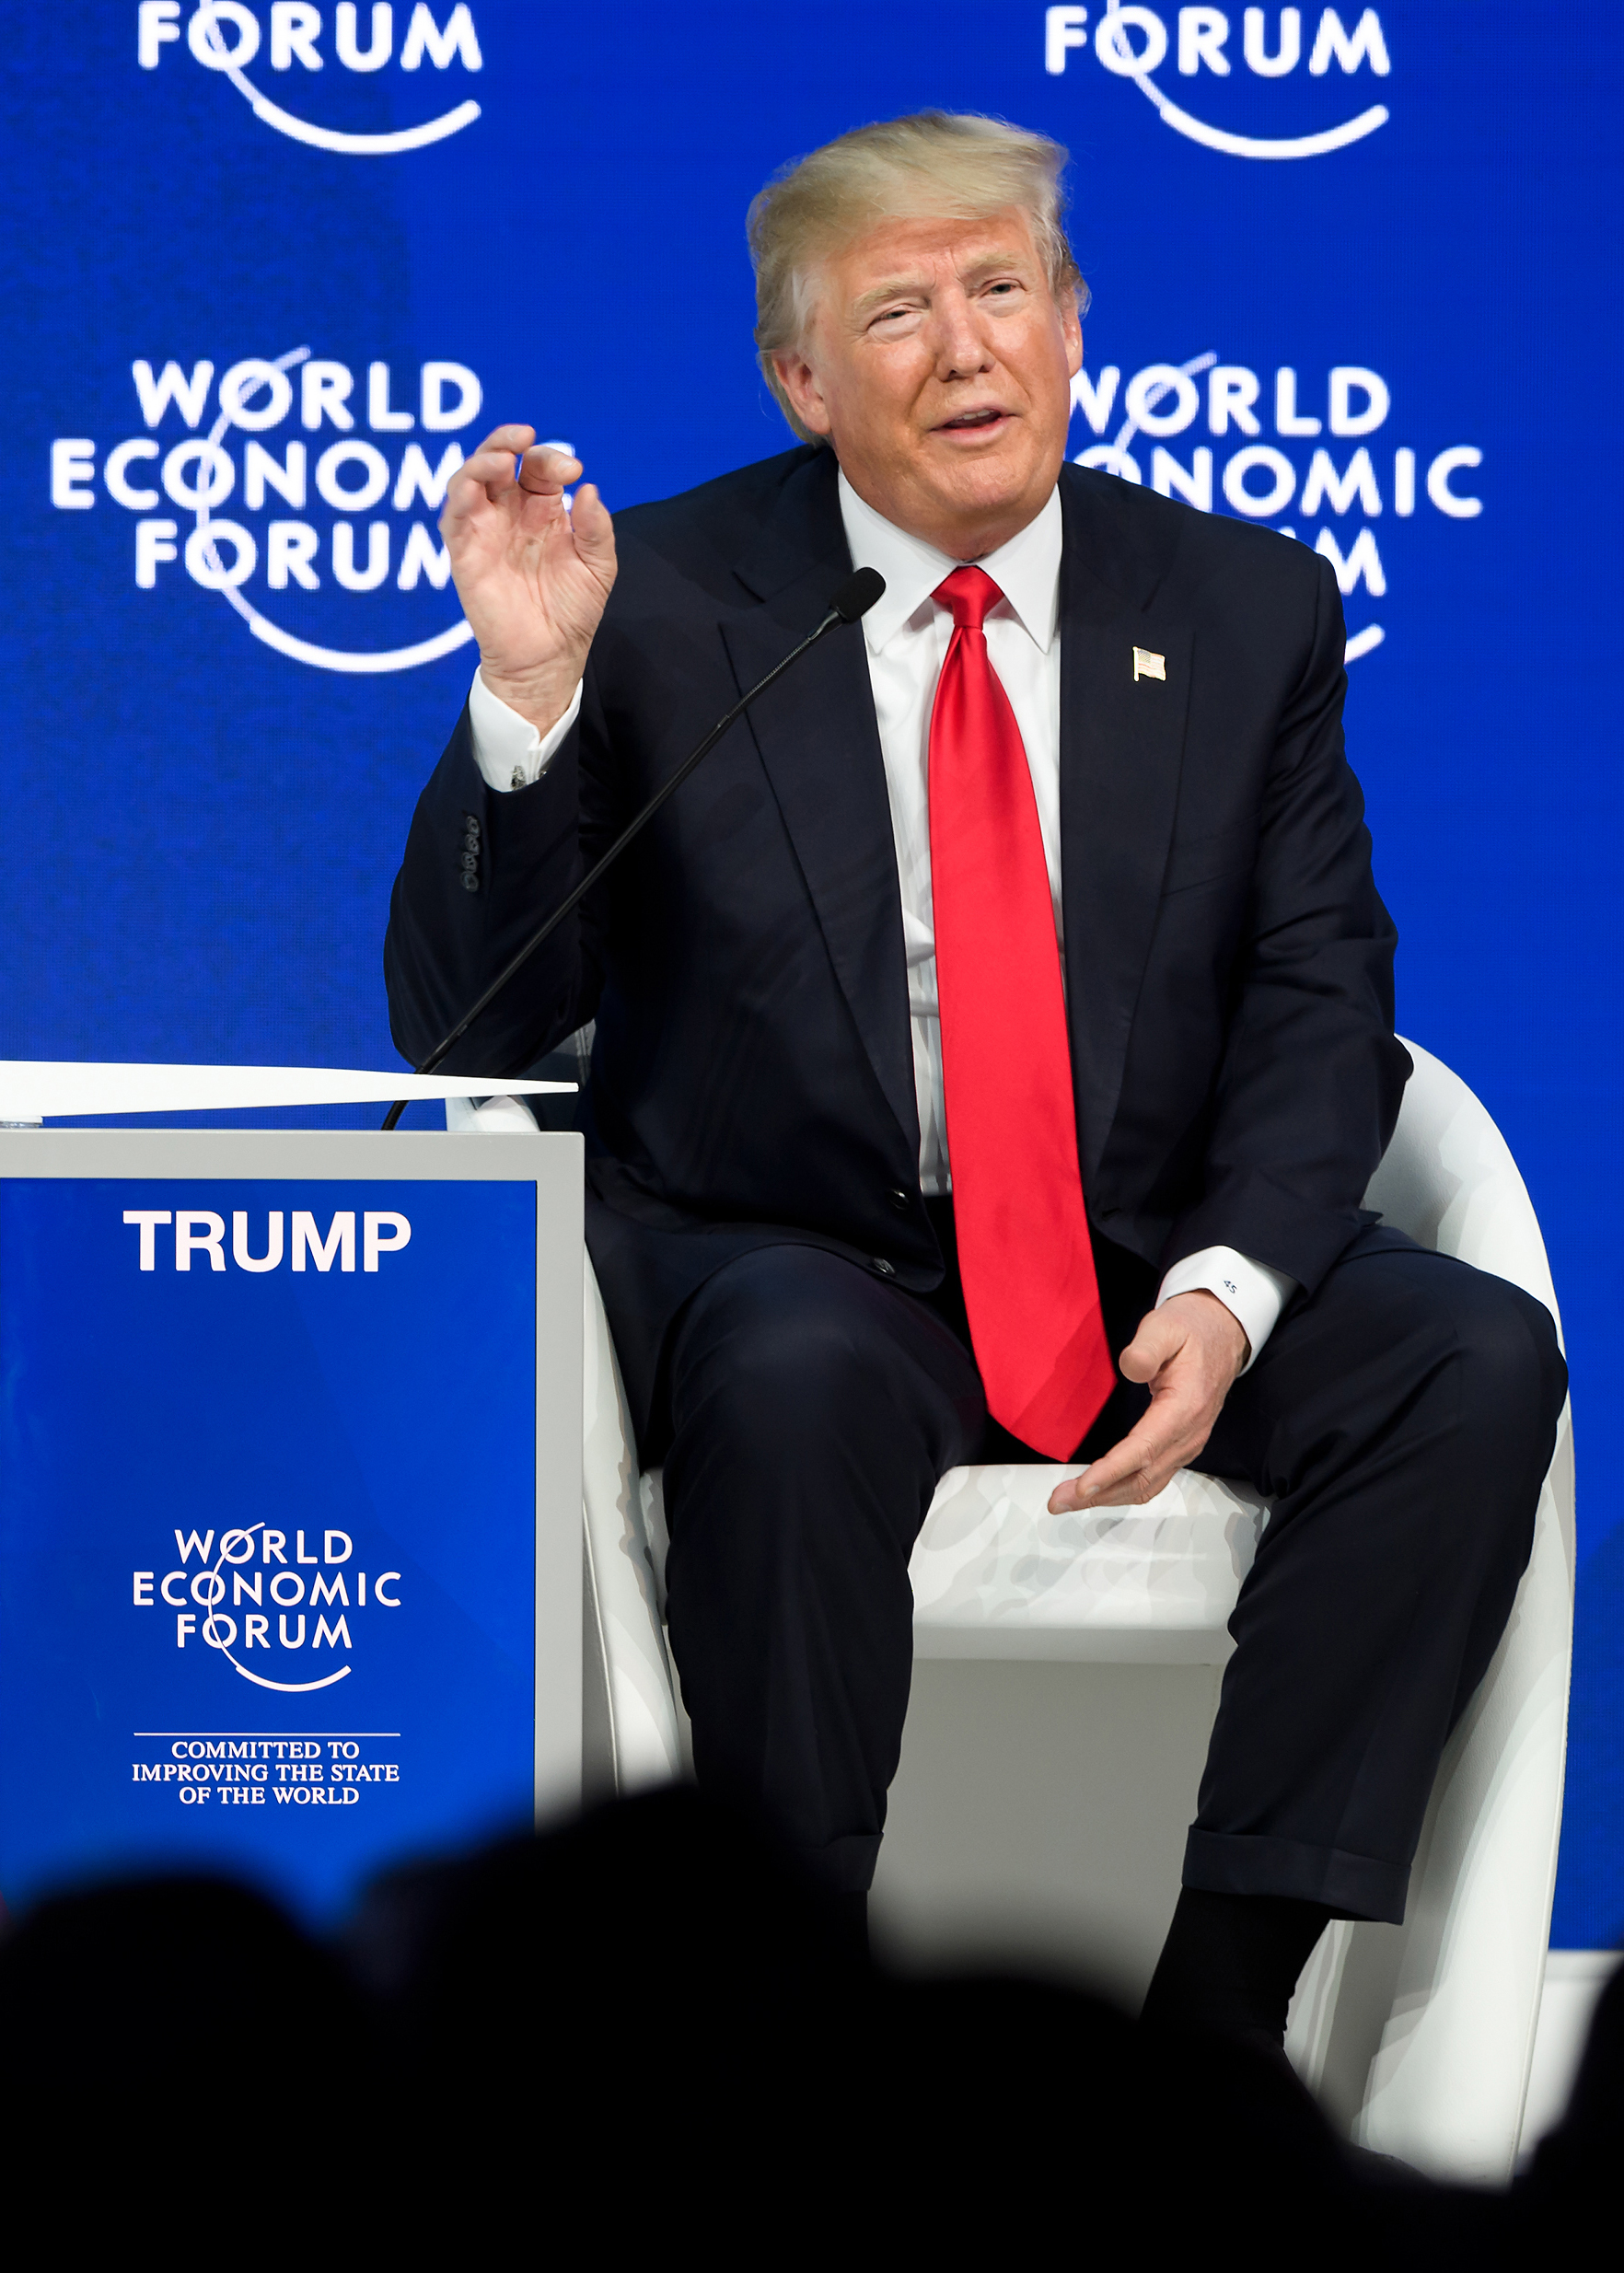 US President Donald Trump gestures as he speaks during a discussion during the World Economic Forum (WEF) annual meeting on January 26, 2018 in Davos, eastern Switzerland. / AFP PHOTO / Fabrice COFFRINI (Photo credit should read FABRICE COFFRINI/AFP/Getty Images)